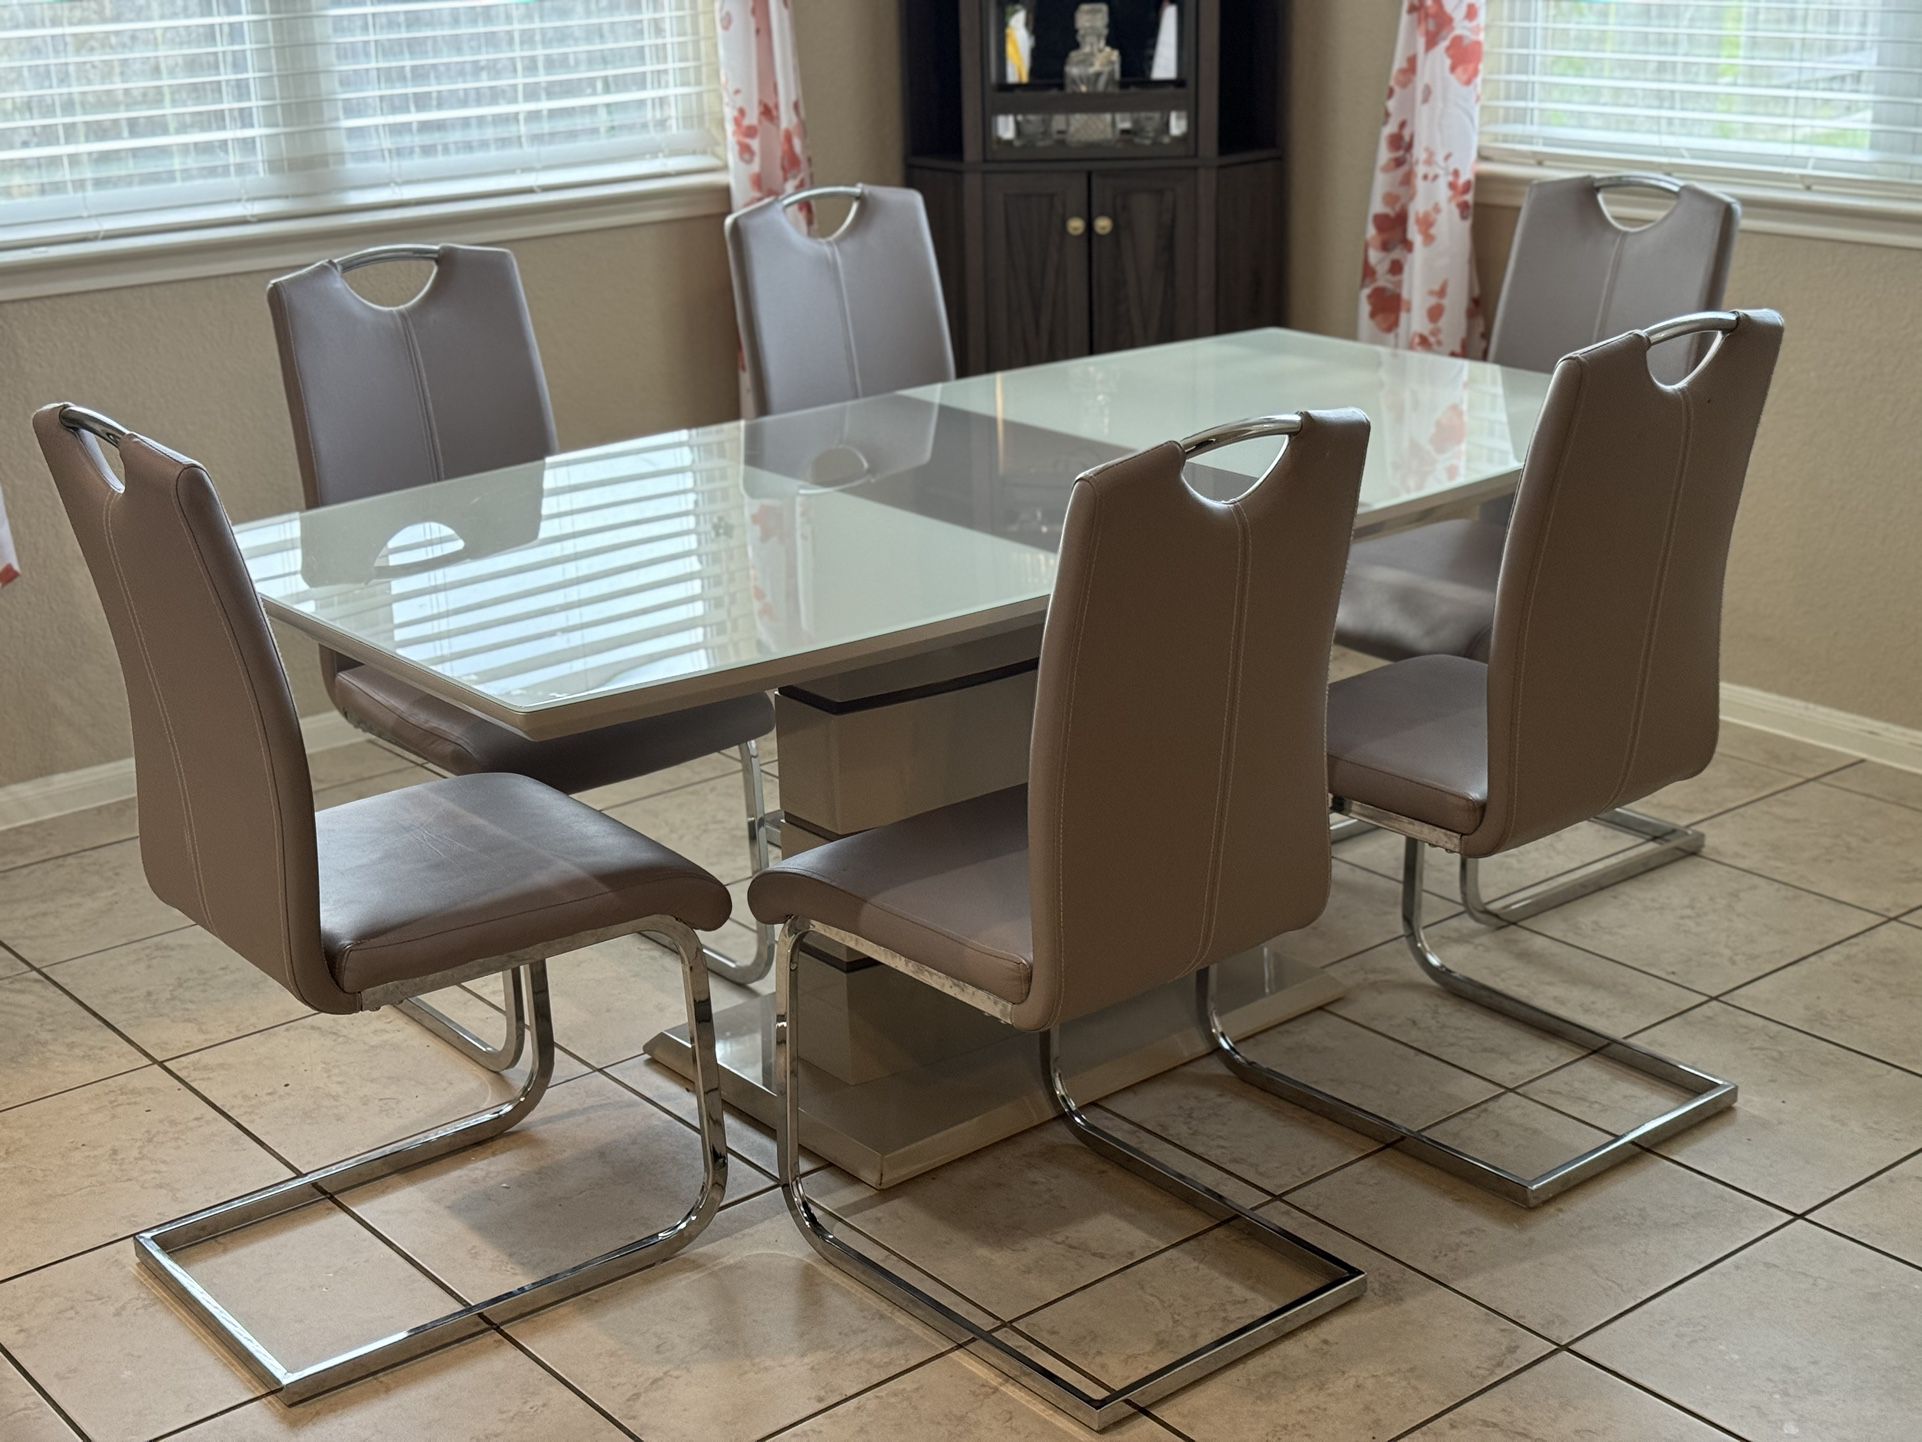 Dining Set, Dining table with 6chairs